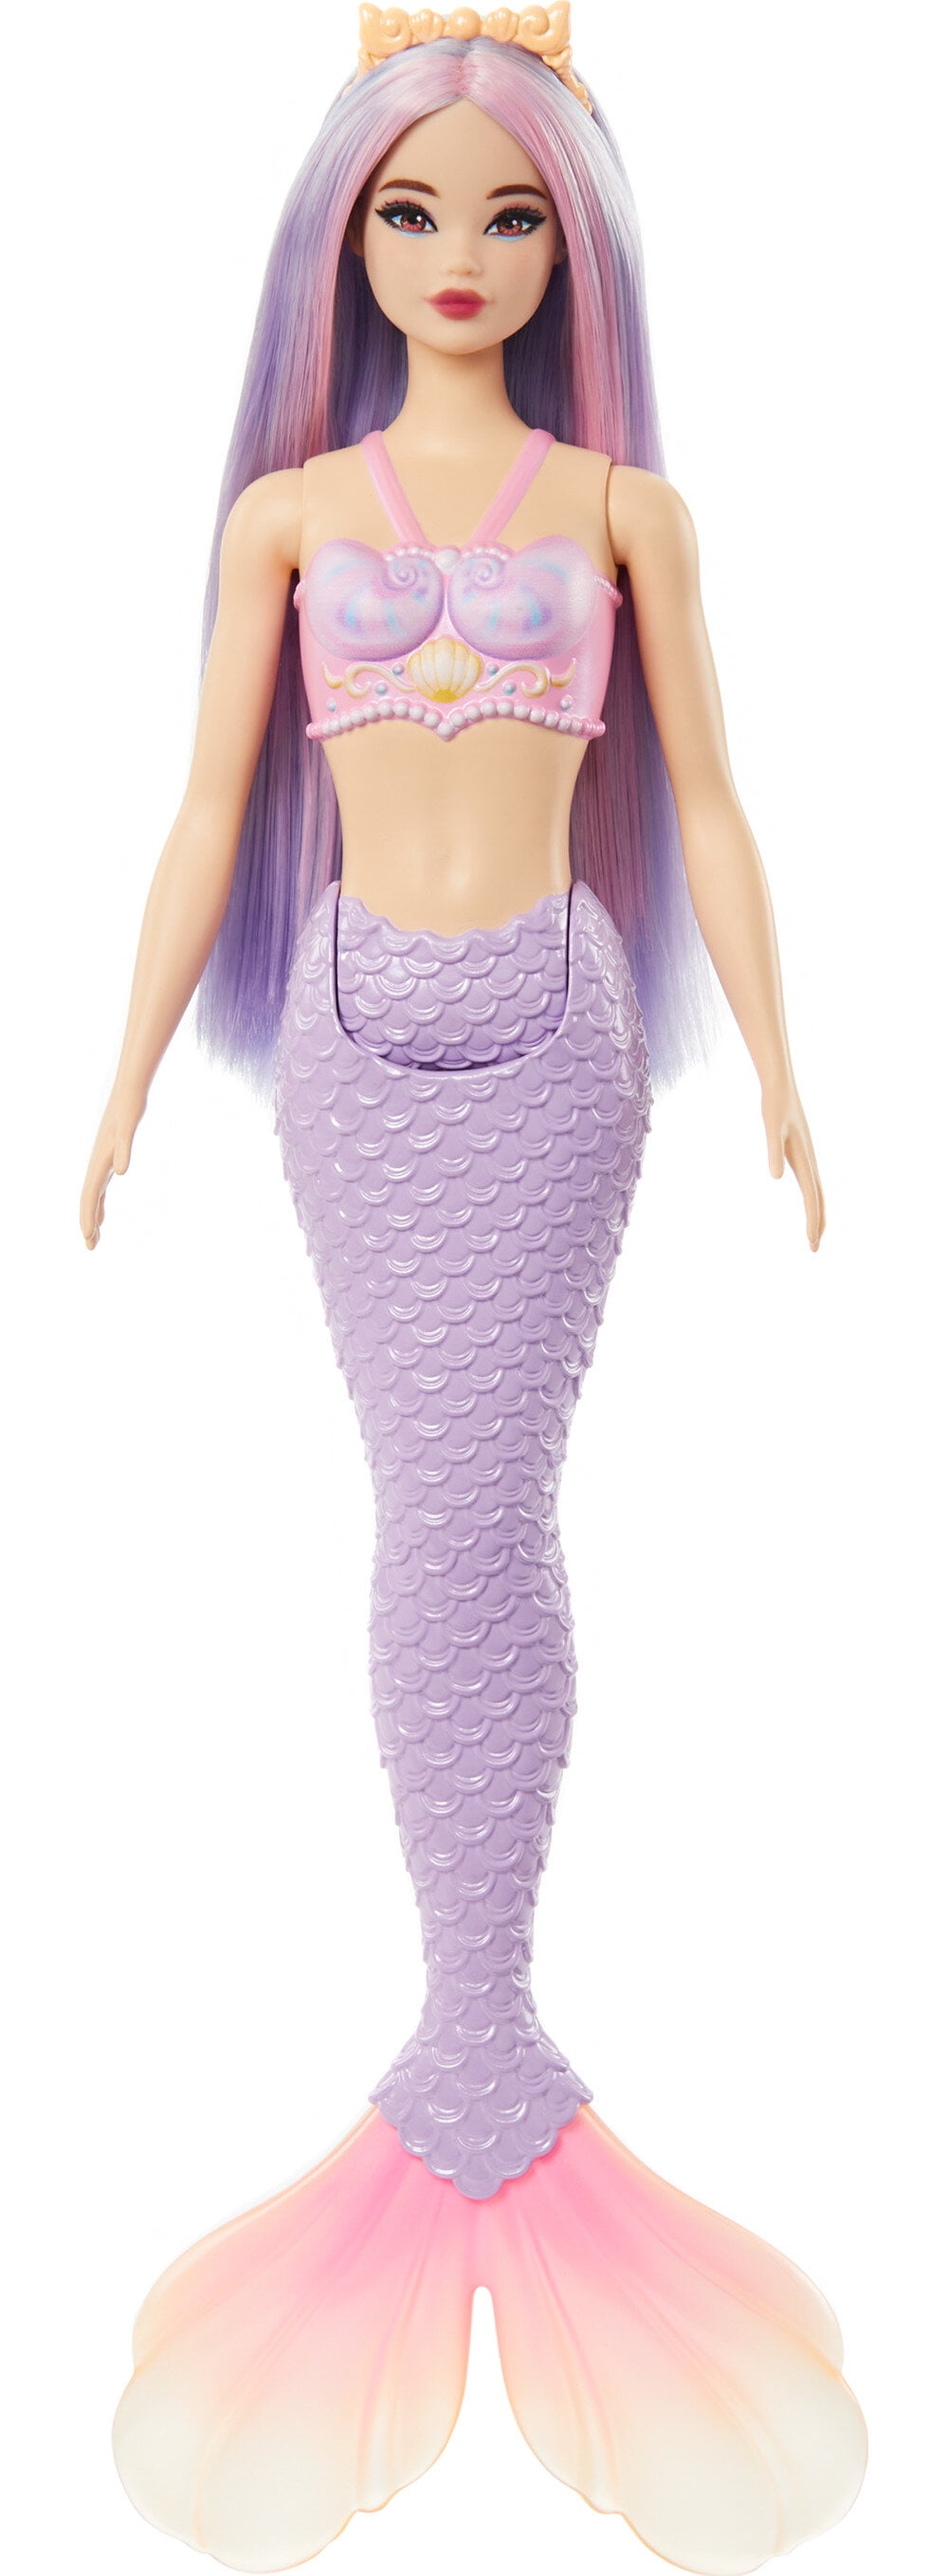 Barbie Mermaid Dolls with Colorful Hair, Tails and Headband Accessories 